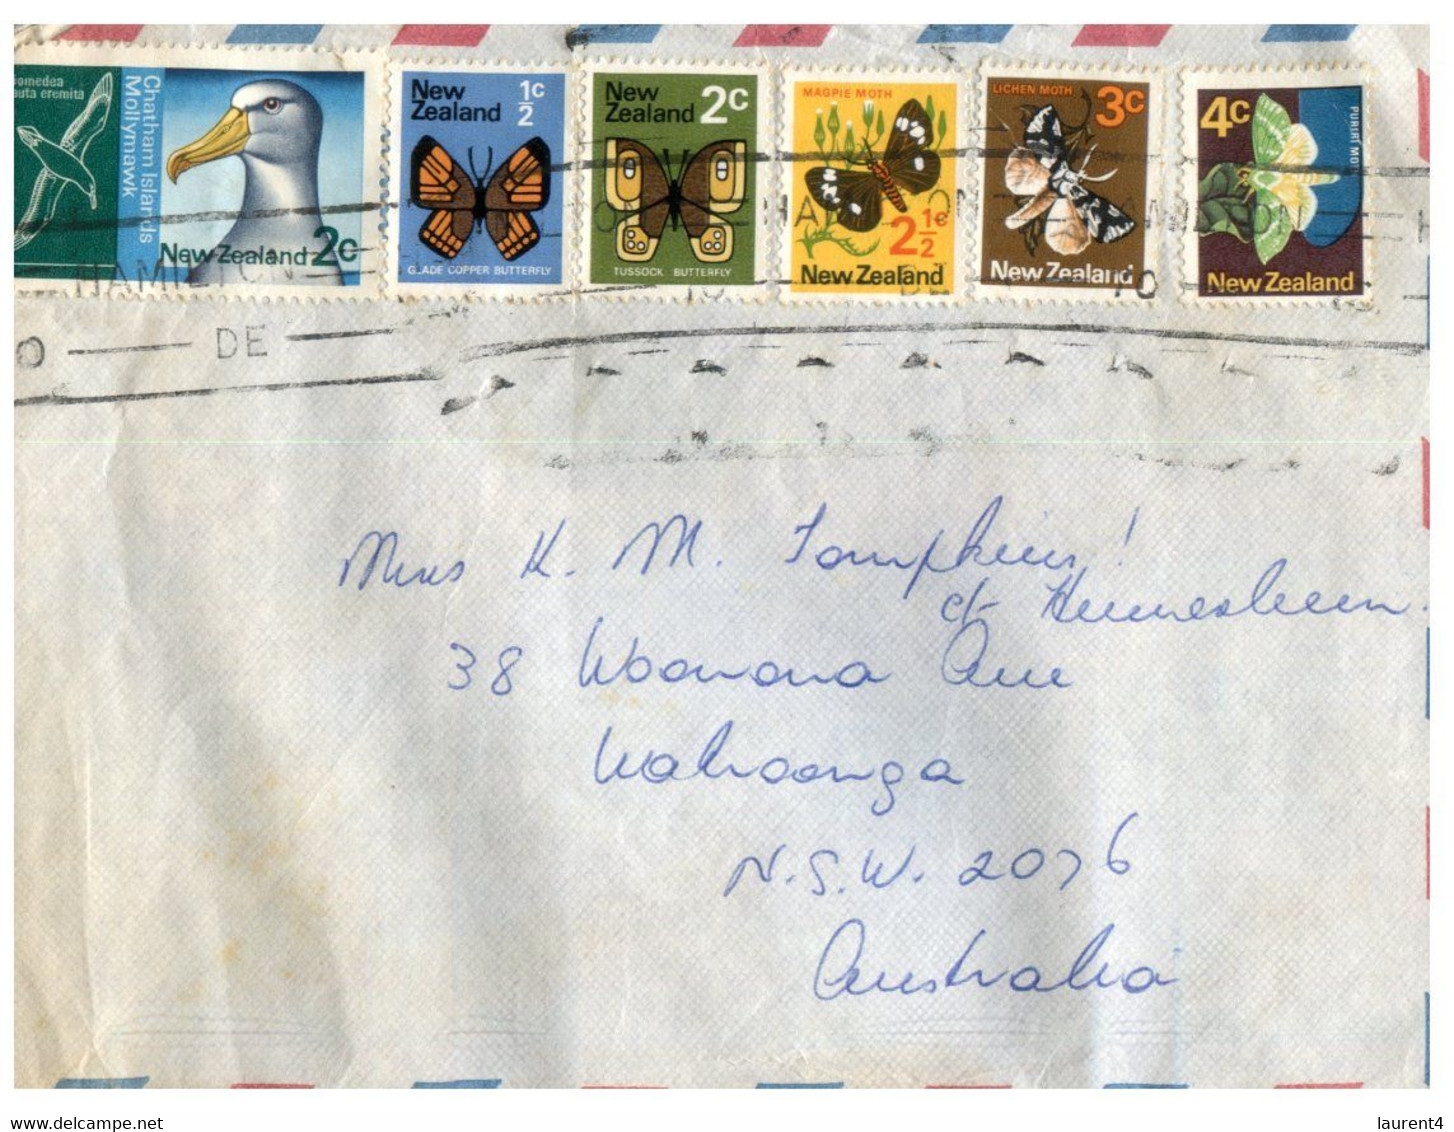 (HH 29) New Zealand FDC Cover Posted To Australia - With Many Butterfly Stamps... (early 1970s ?) - Covers & Documents